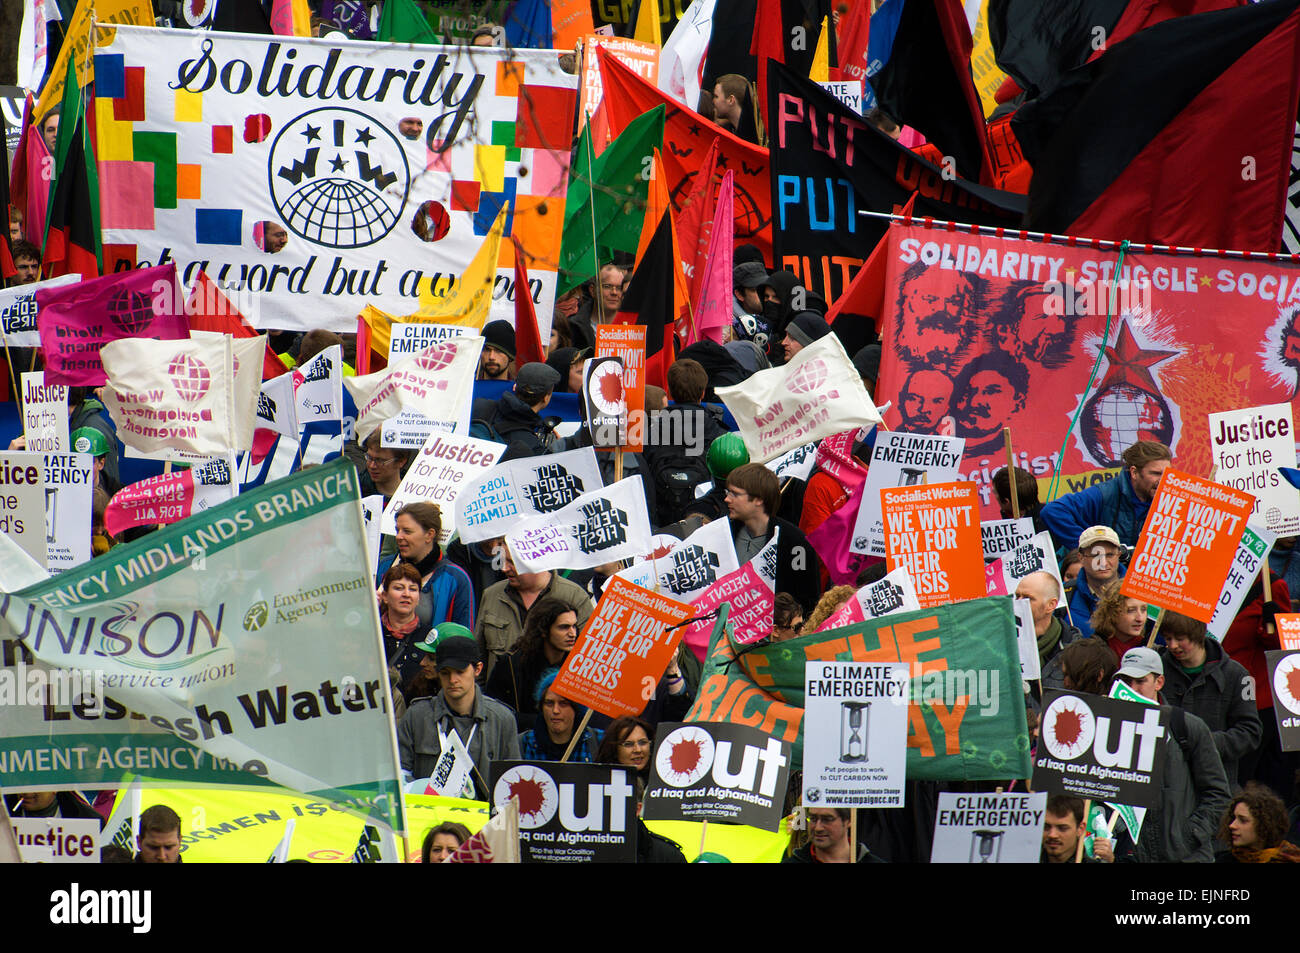 The Put People First demo was about fair distribution of wealth, decent jobs for all and low carbon emissions. Stock Photo